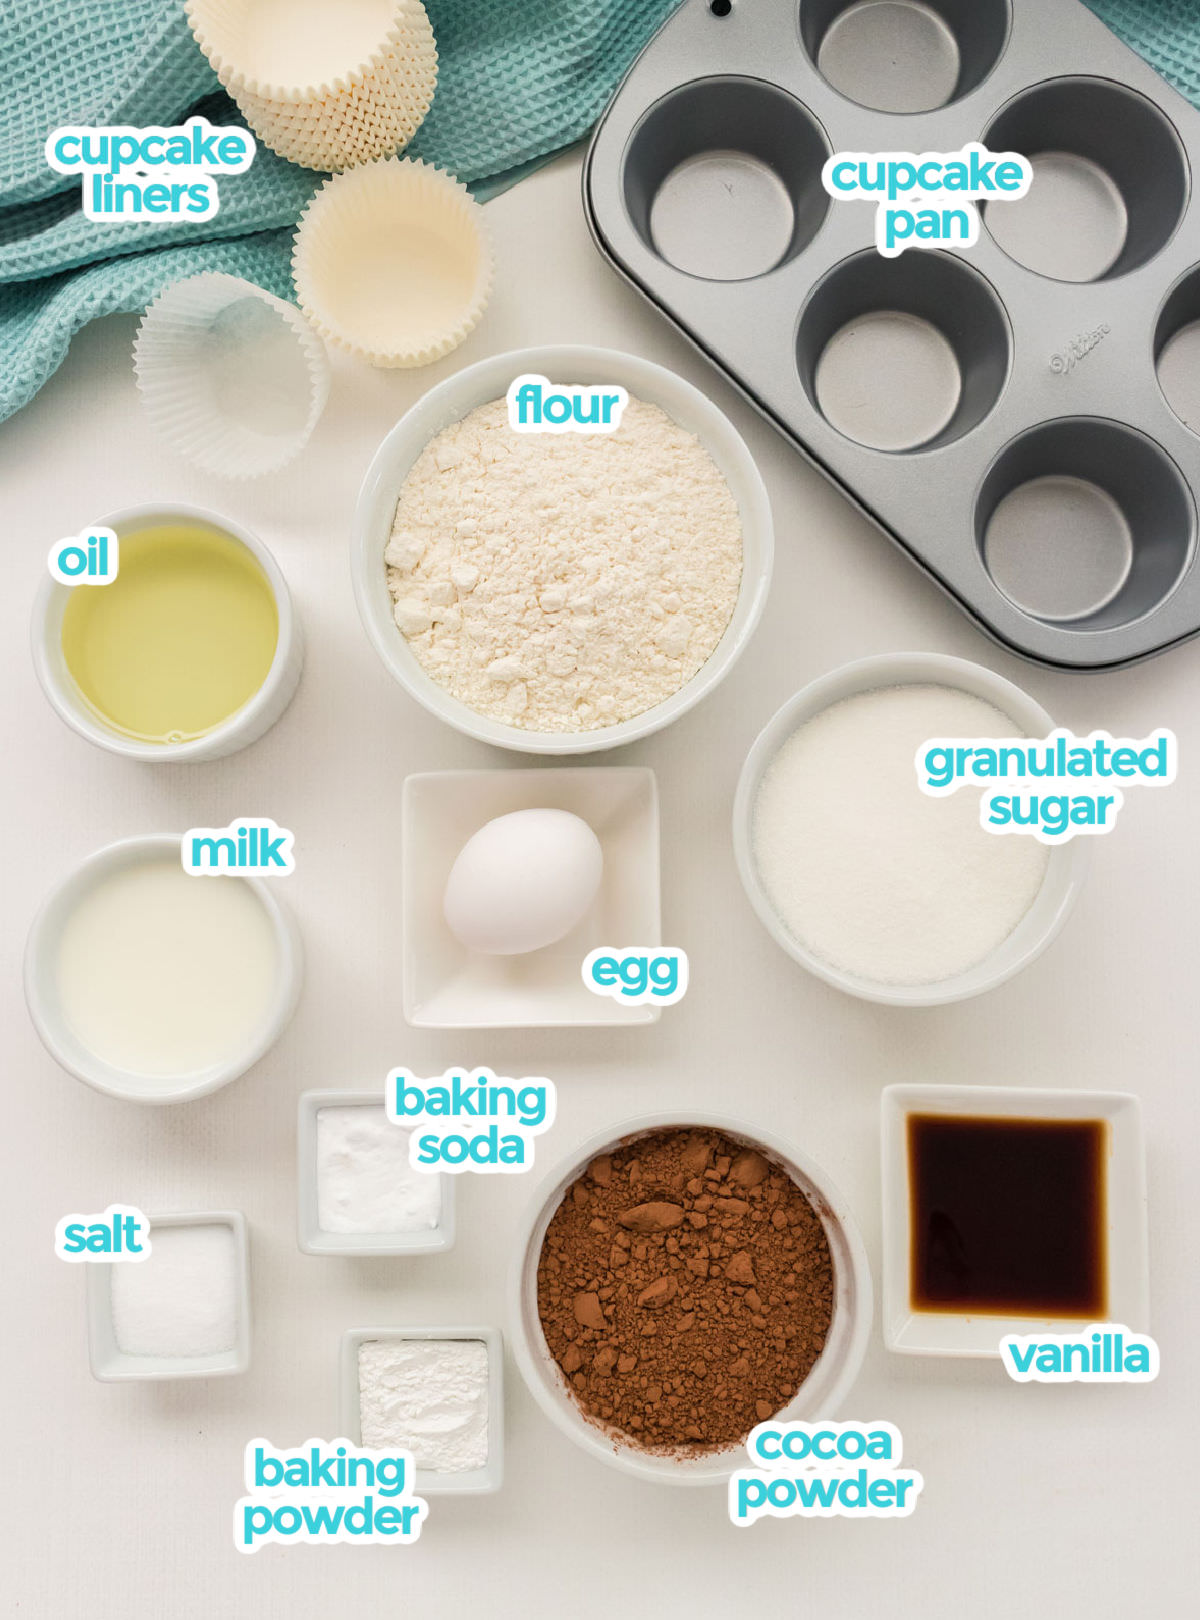 All the ingredients needed to make Homemade Chocolate Cupcakes including cupcake liners, a cupcake pan, flour, sugar, cocoa powder, oil, milk, egg, vanilla, baking soda, baking powder and salt.